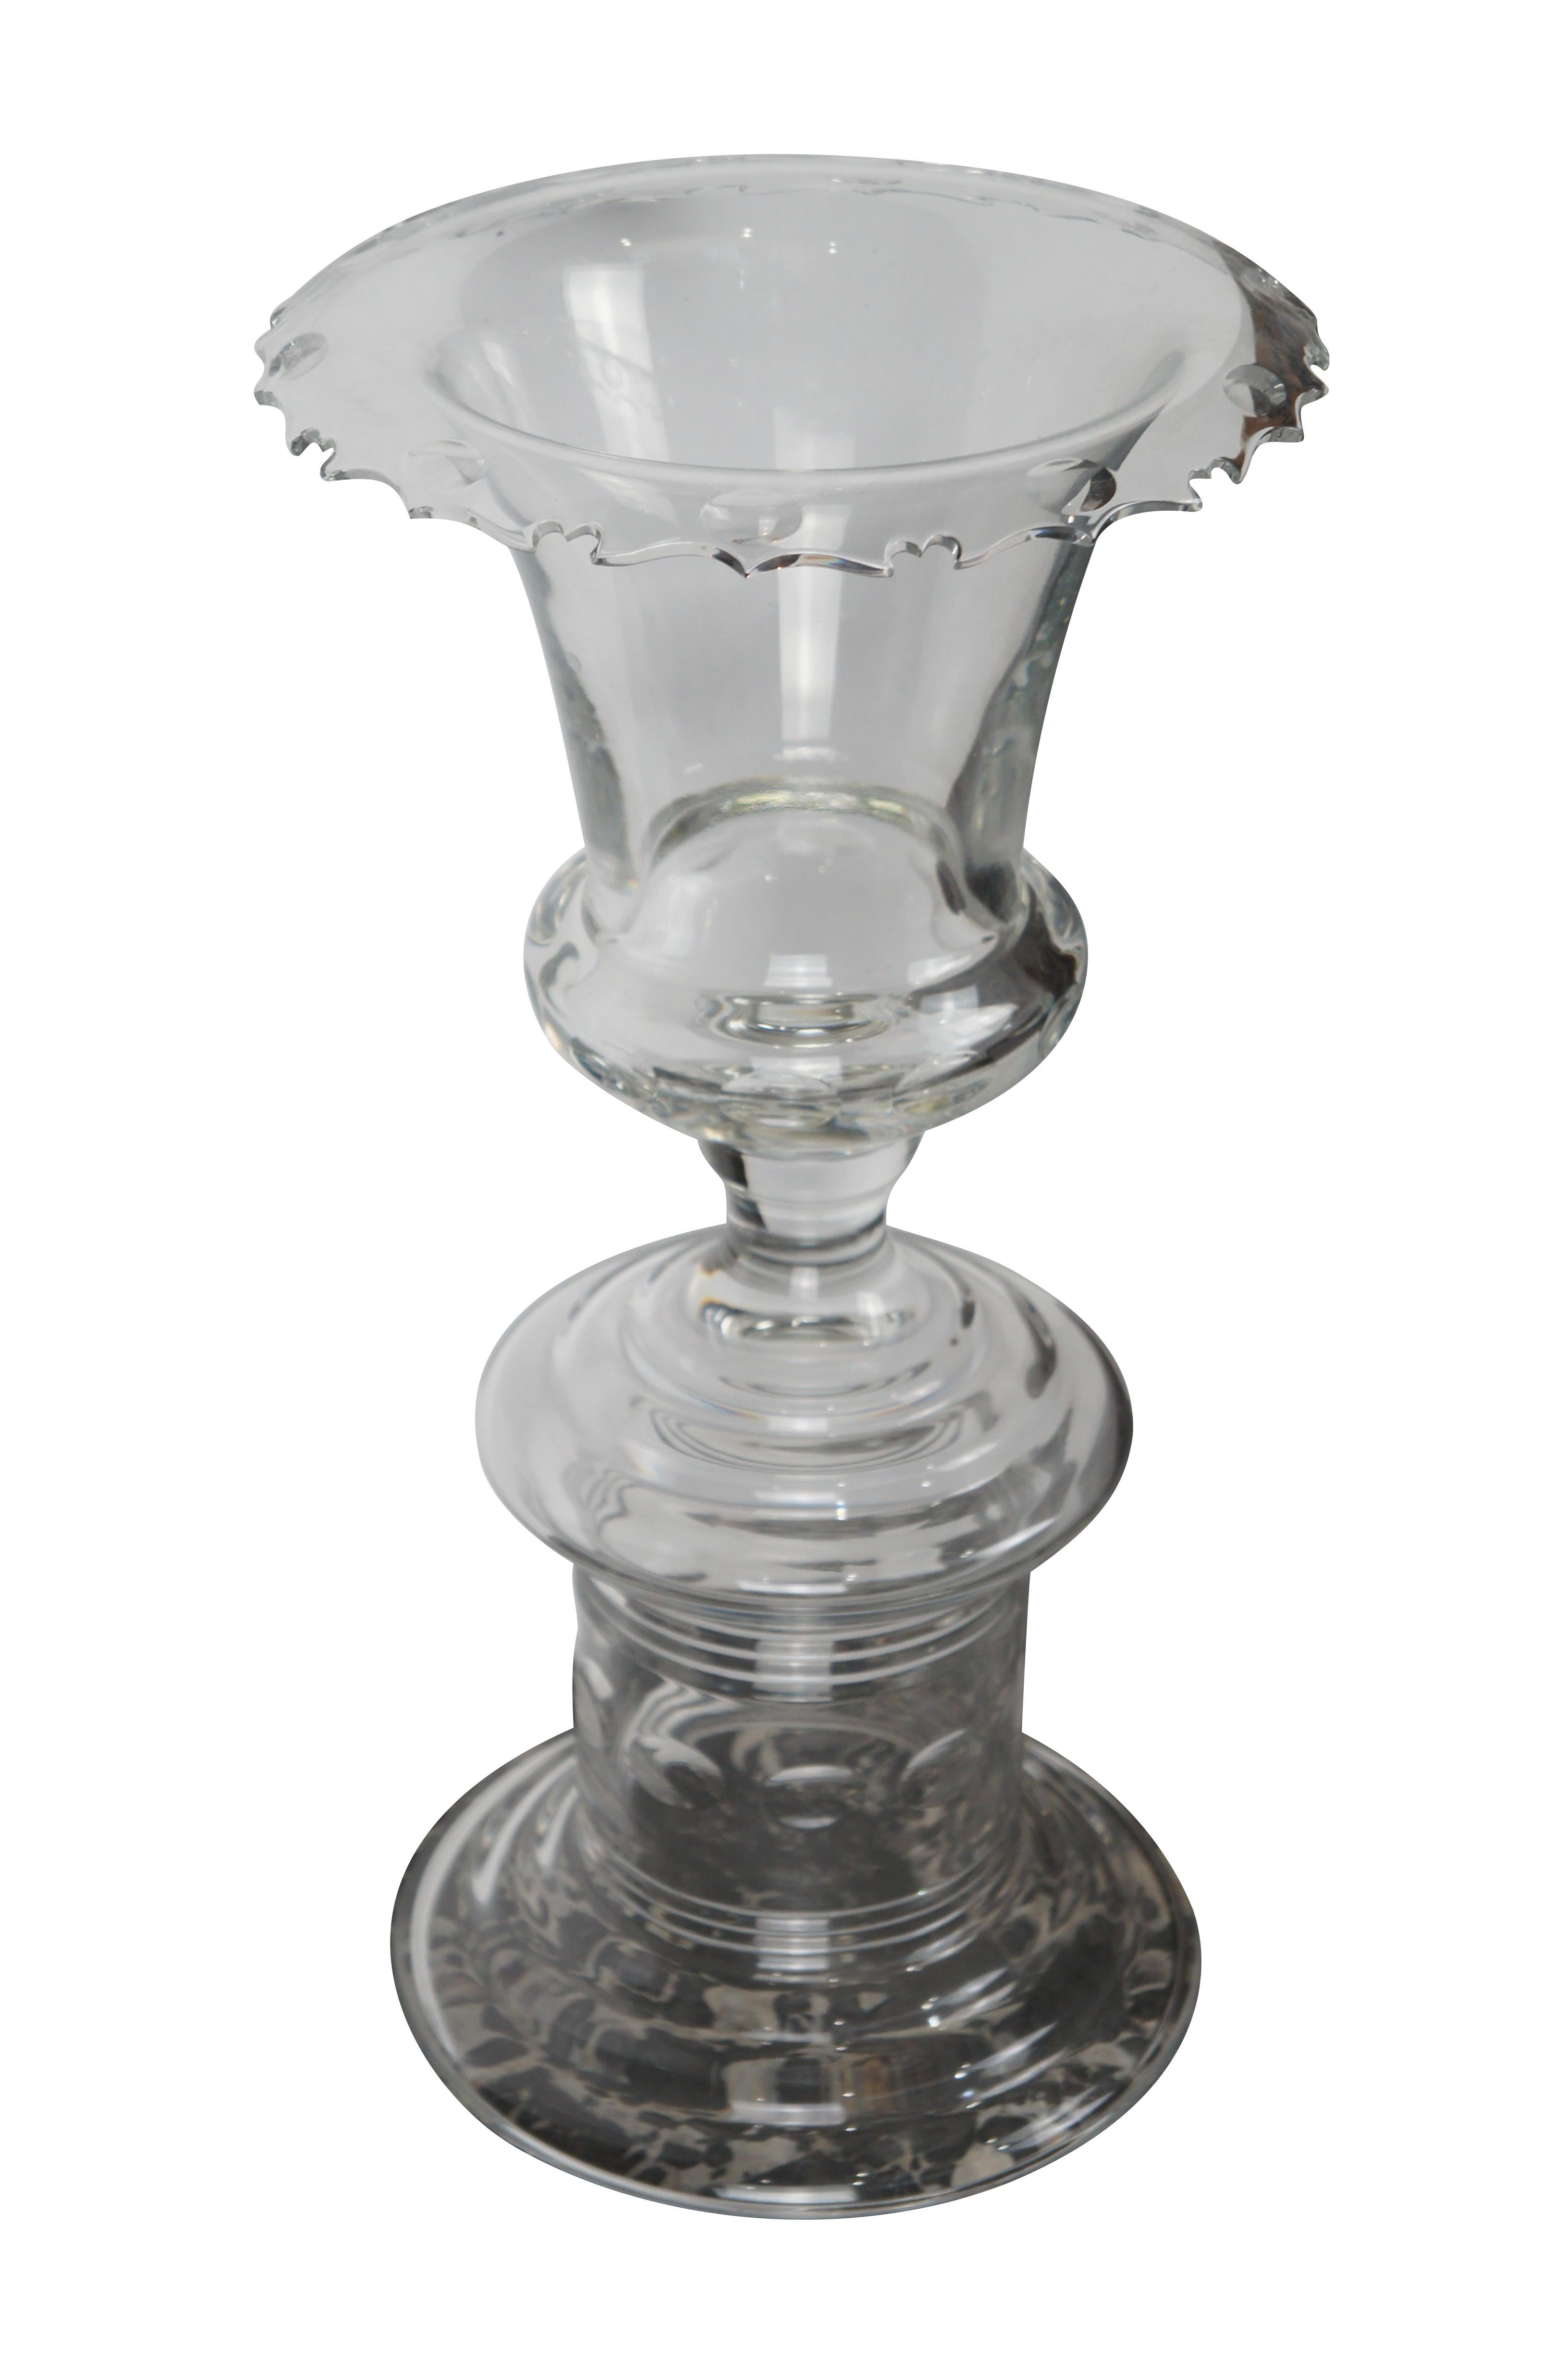 Large and impressive crystal vase from the Jenkins Collection by William Yeoward. Features a trophy urn / flower vase with cut coin dot patterns and ribbed accents over a tired footed base. The vase has a flared mouth with sawtooth cut design. This